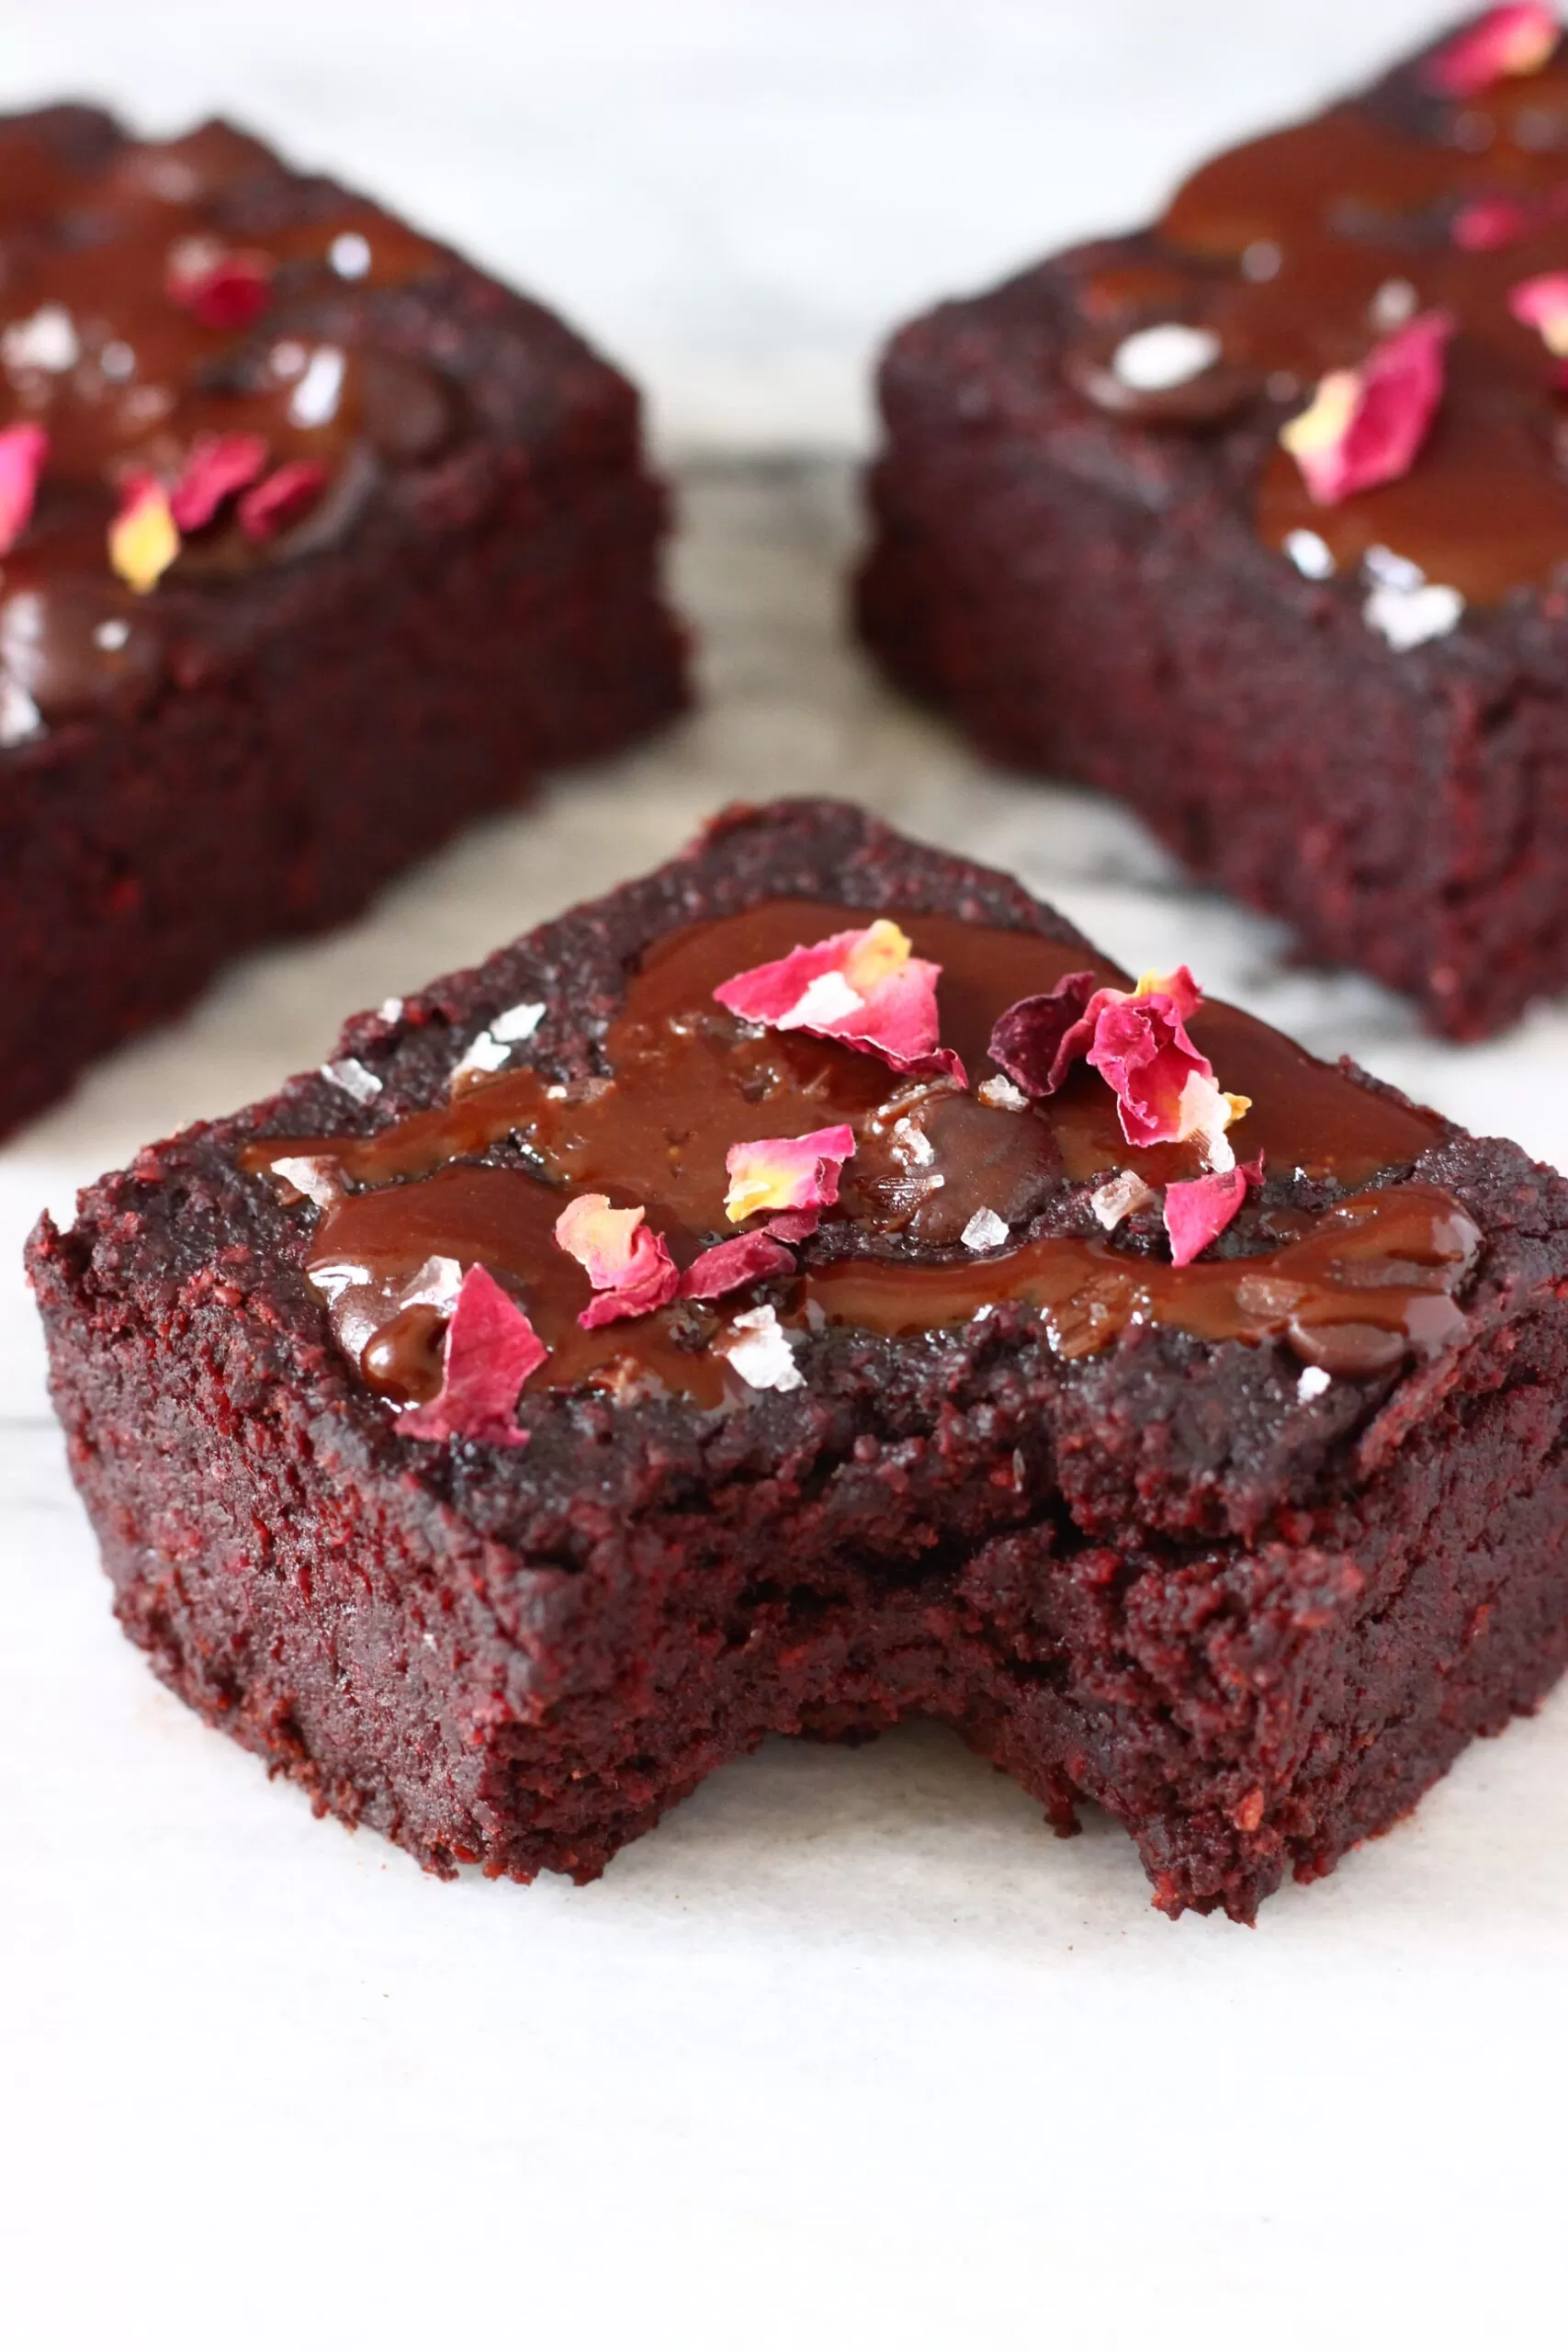 Three beetroot brownies with chocolate frosting, rose petals and salt flakes with a bite taken out of one